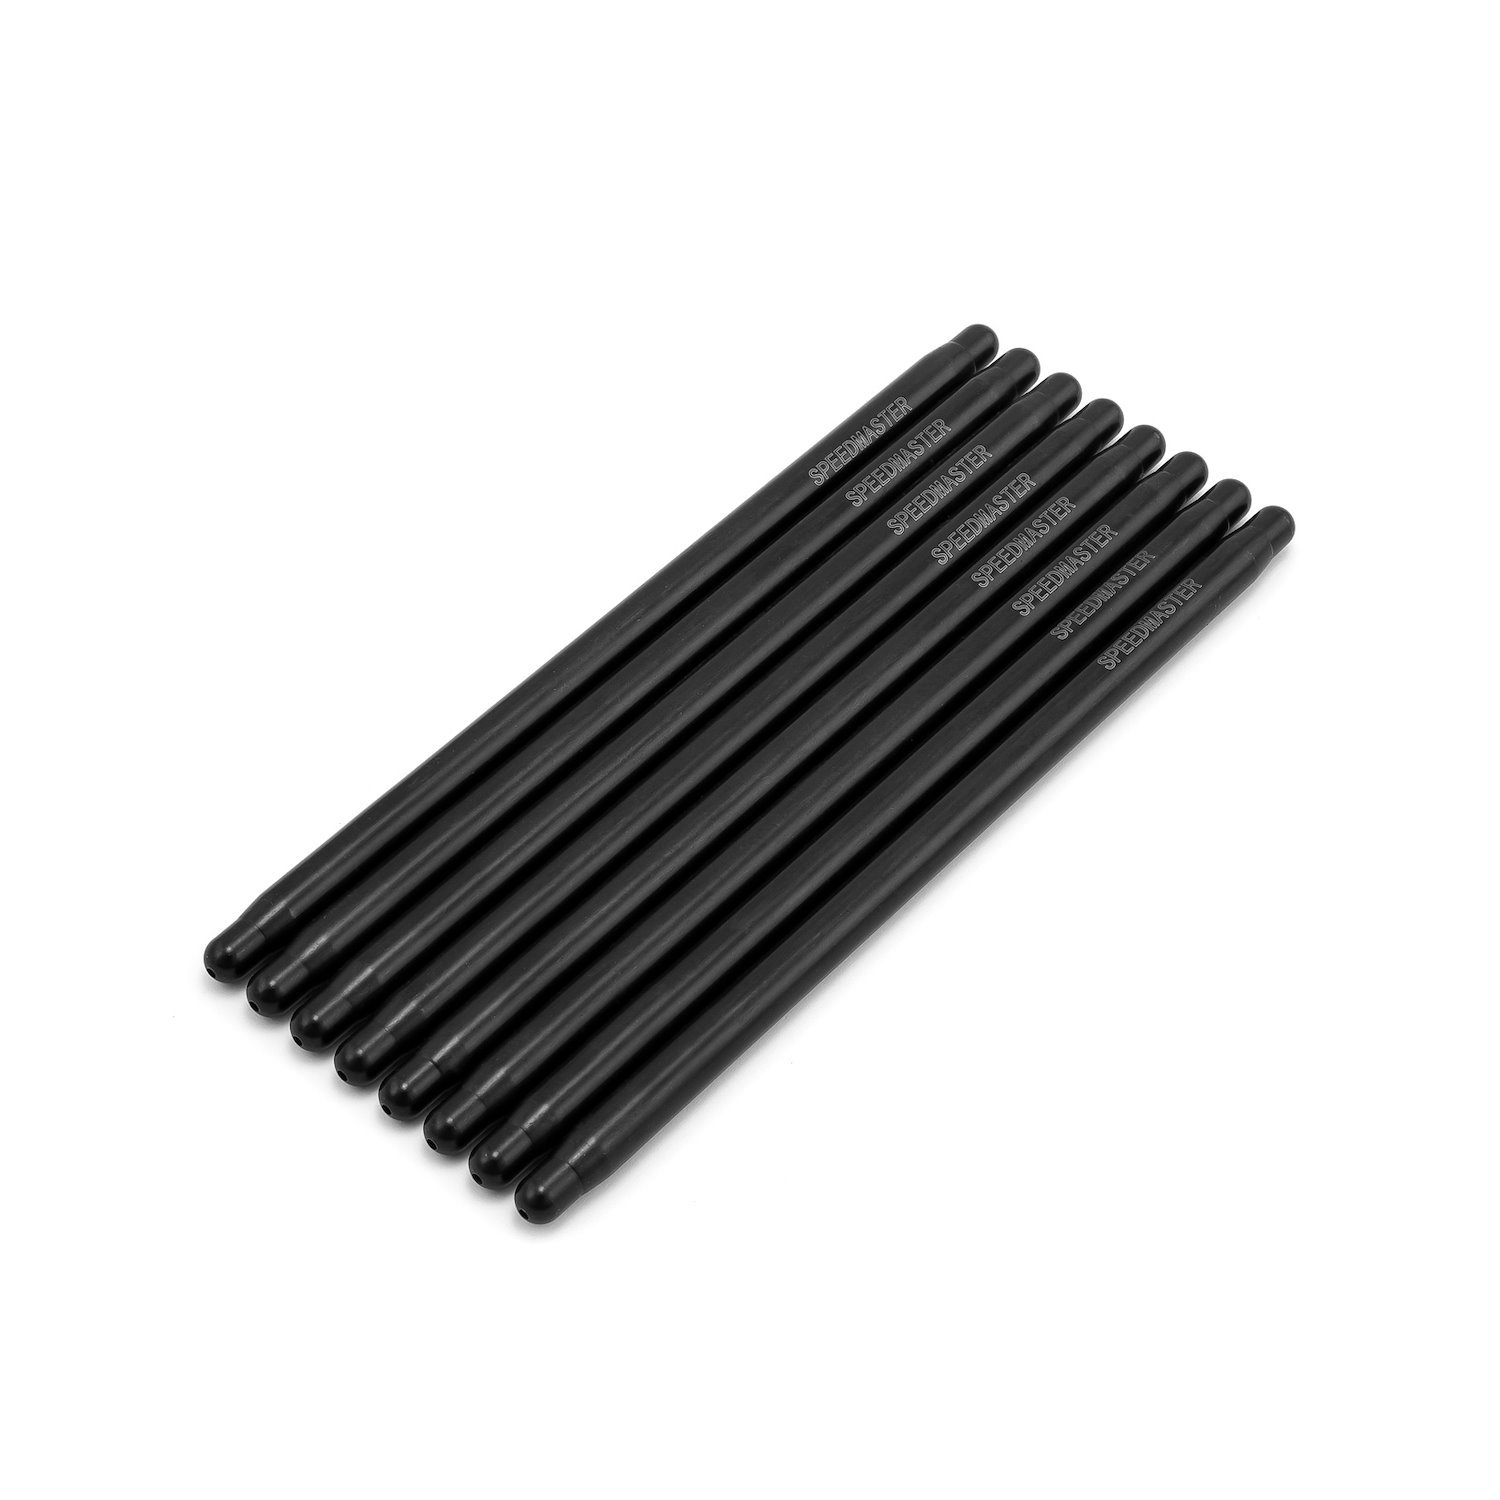 1-254-031 8.500 in. Chromoly Heat-Treated 3/8 in. 0.080 in. Wall DNA One-Piece Pushrods